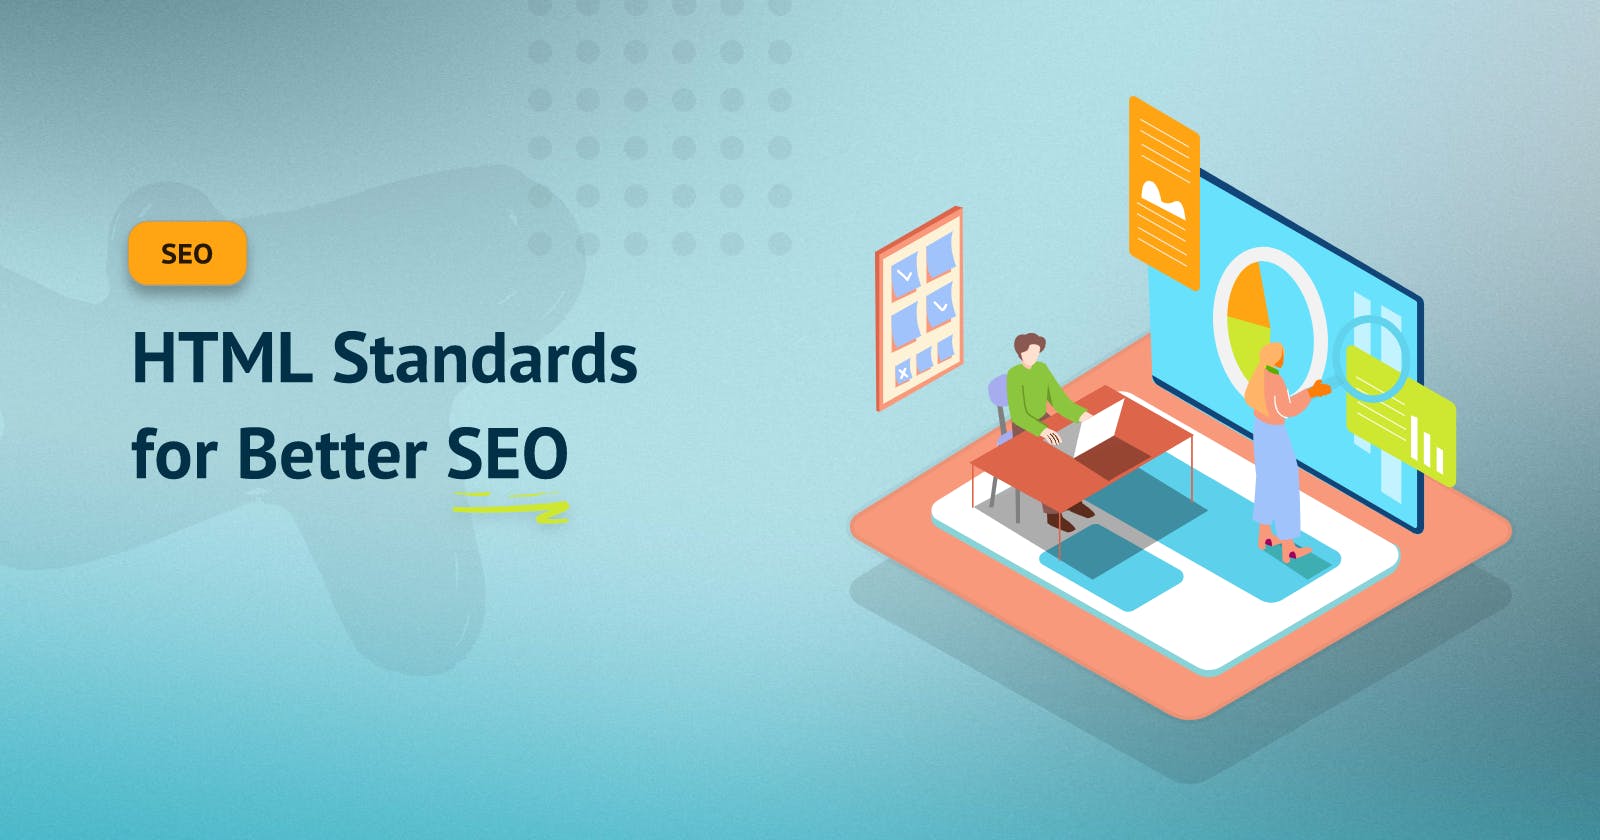 HTML Standards for Better SEO: The HEAD element